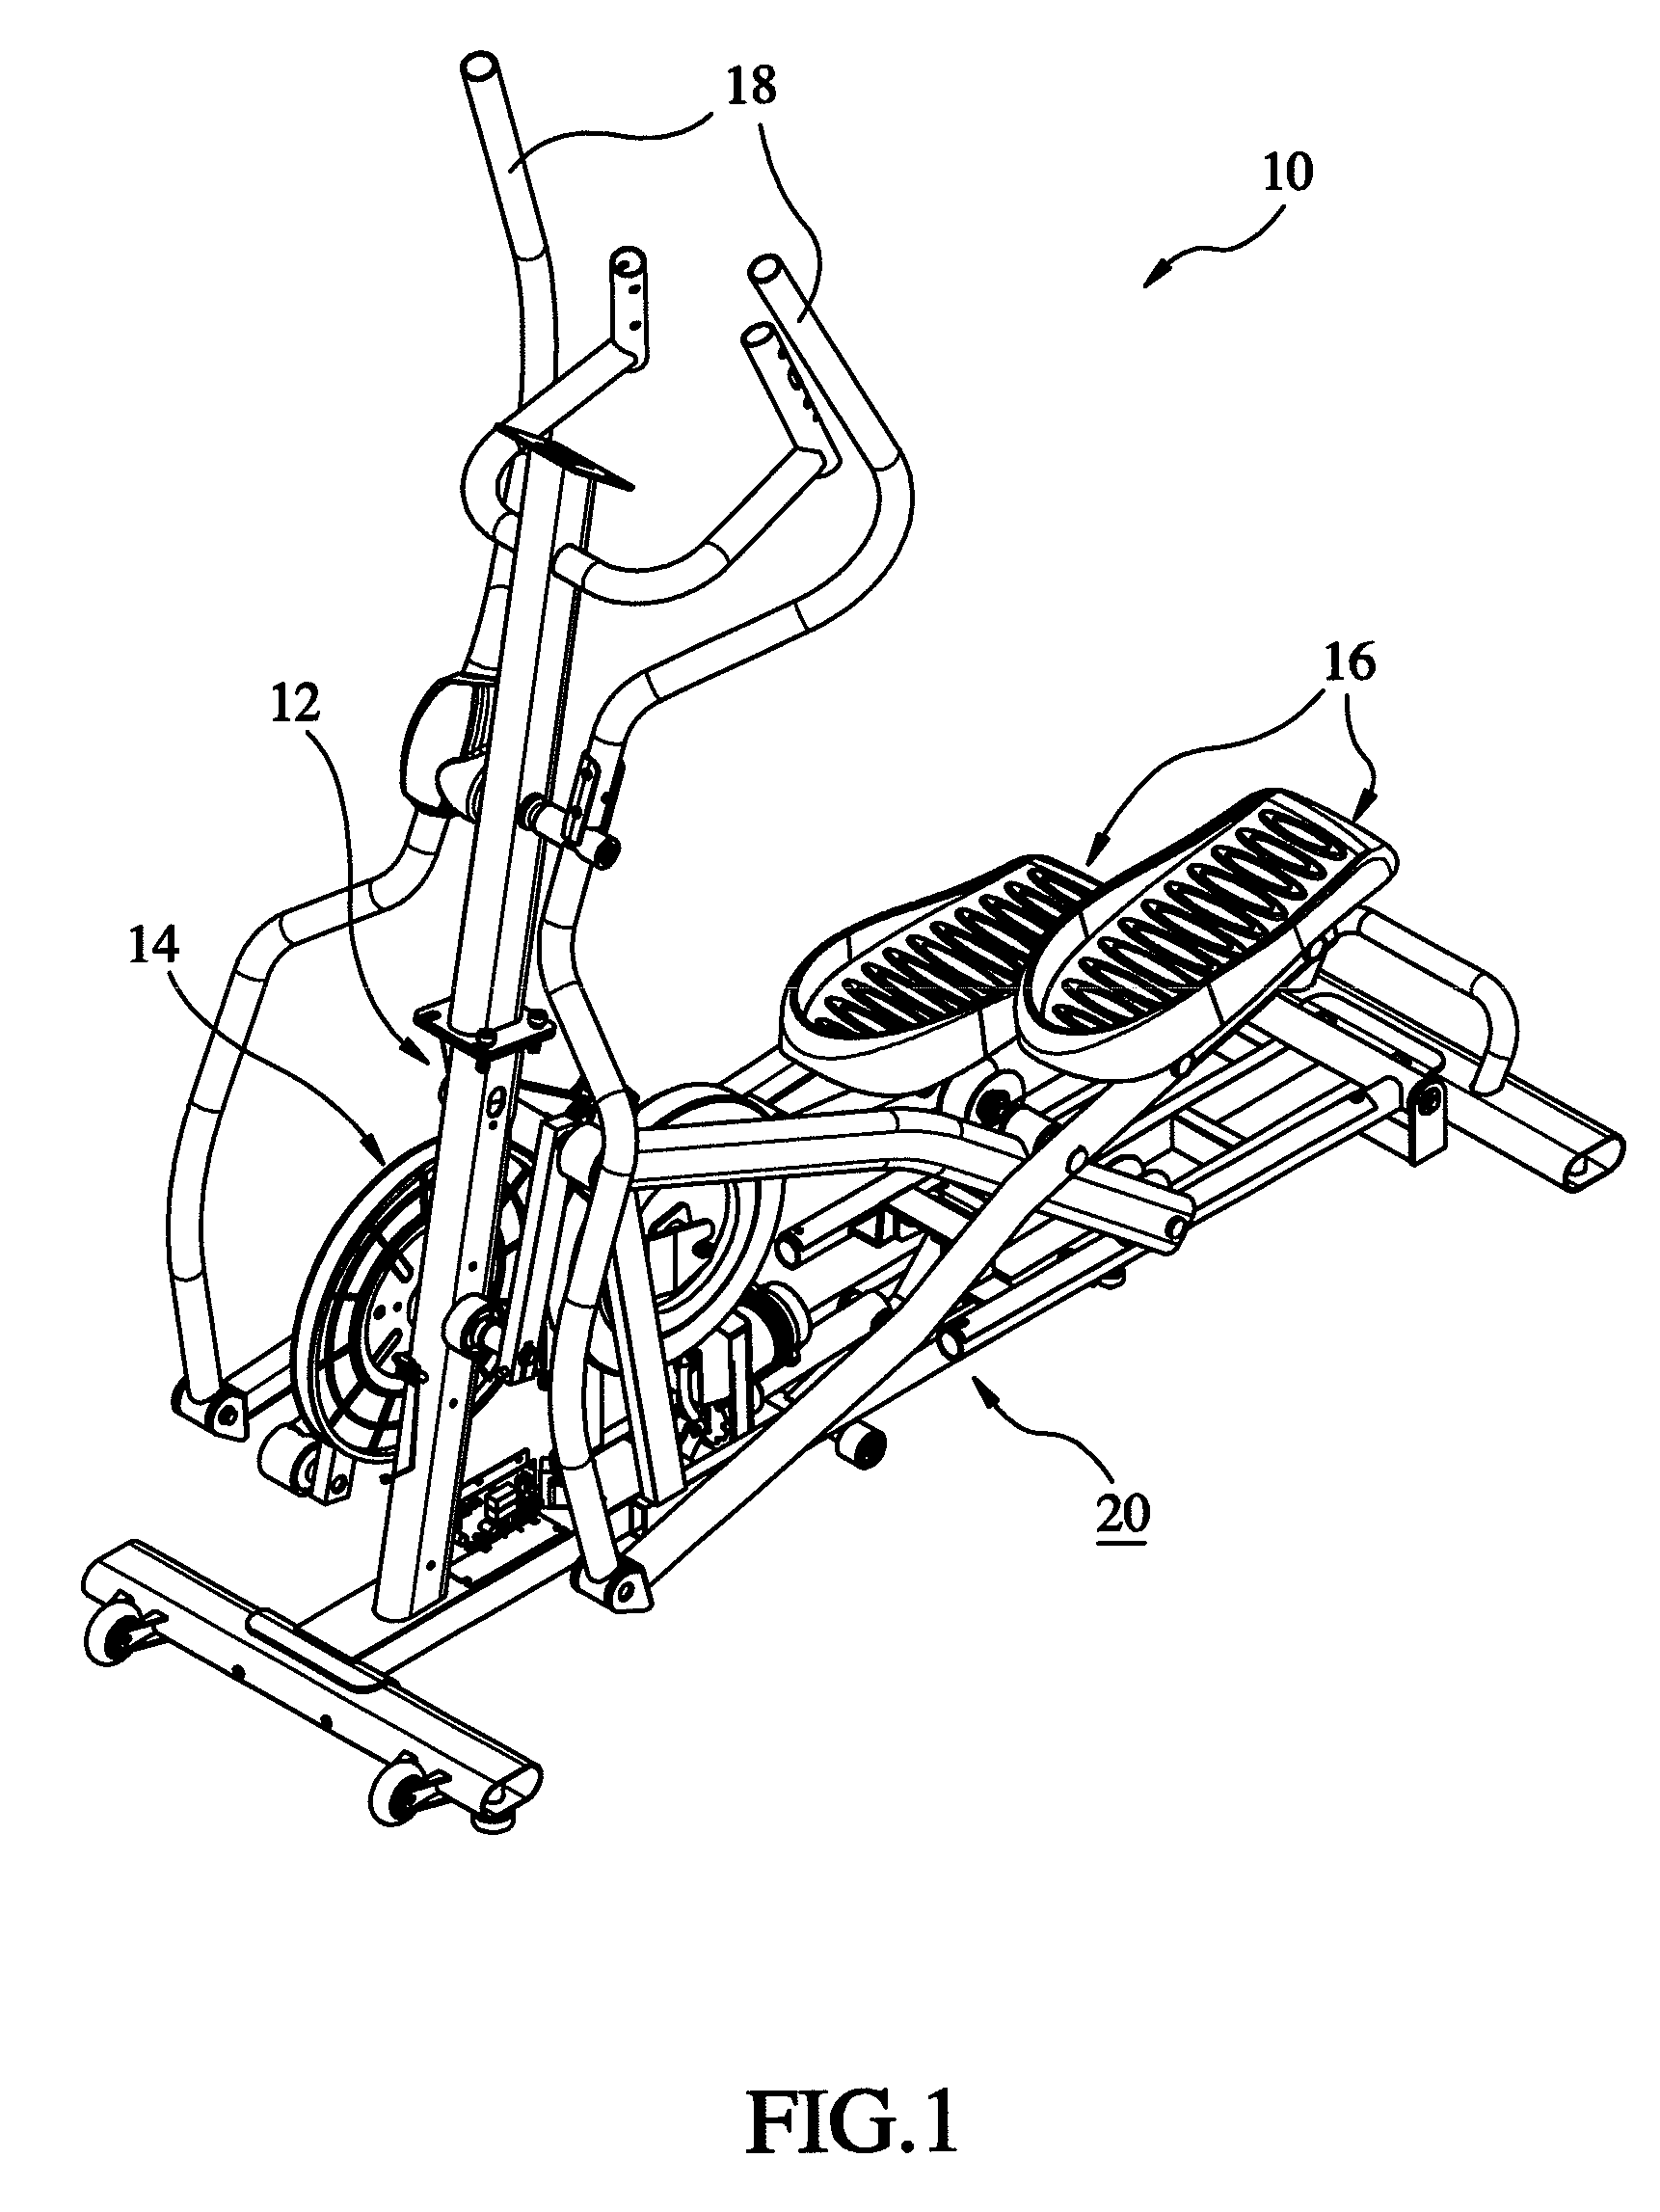 Pedal lifting mechanism for elliptical trainer